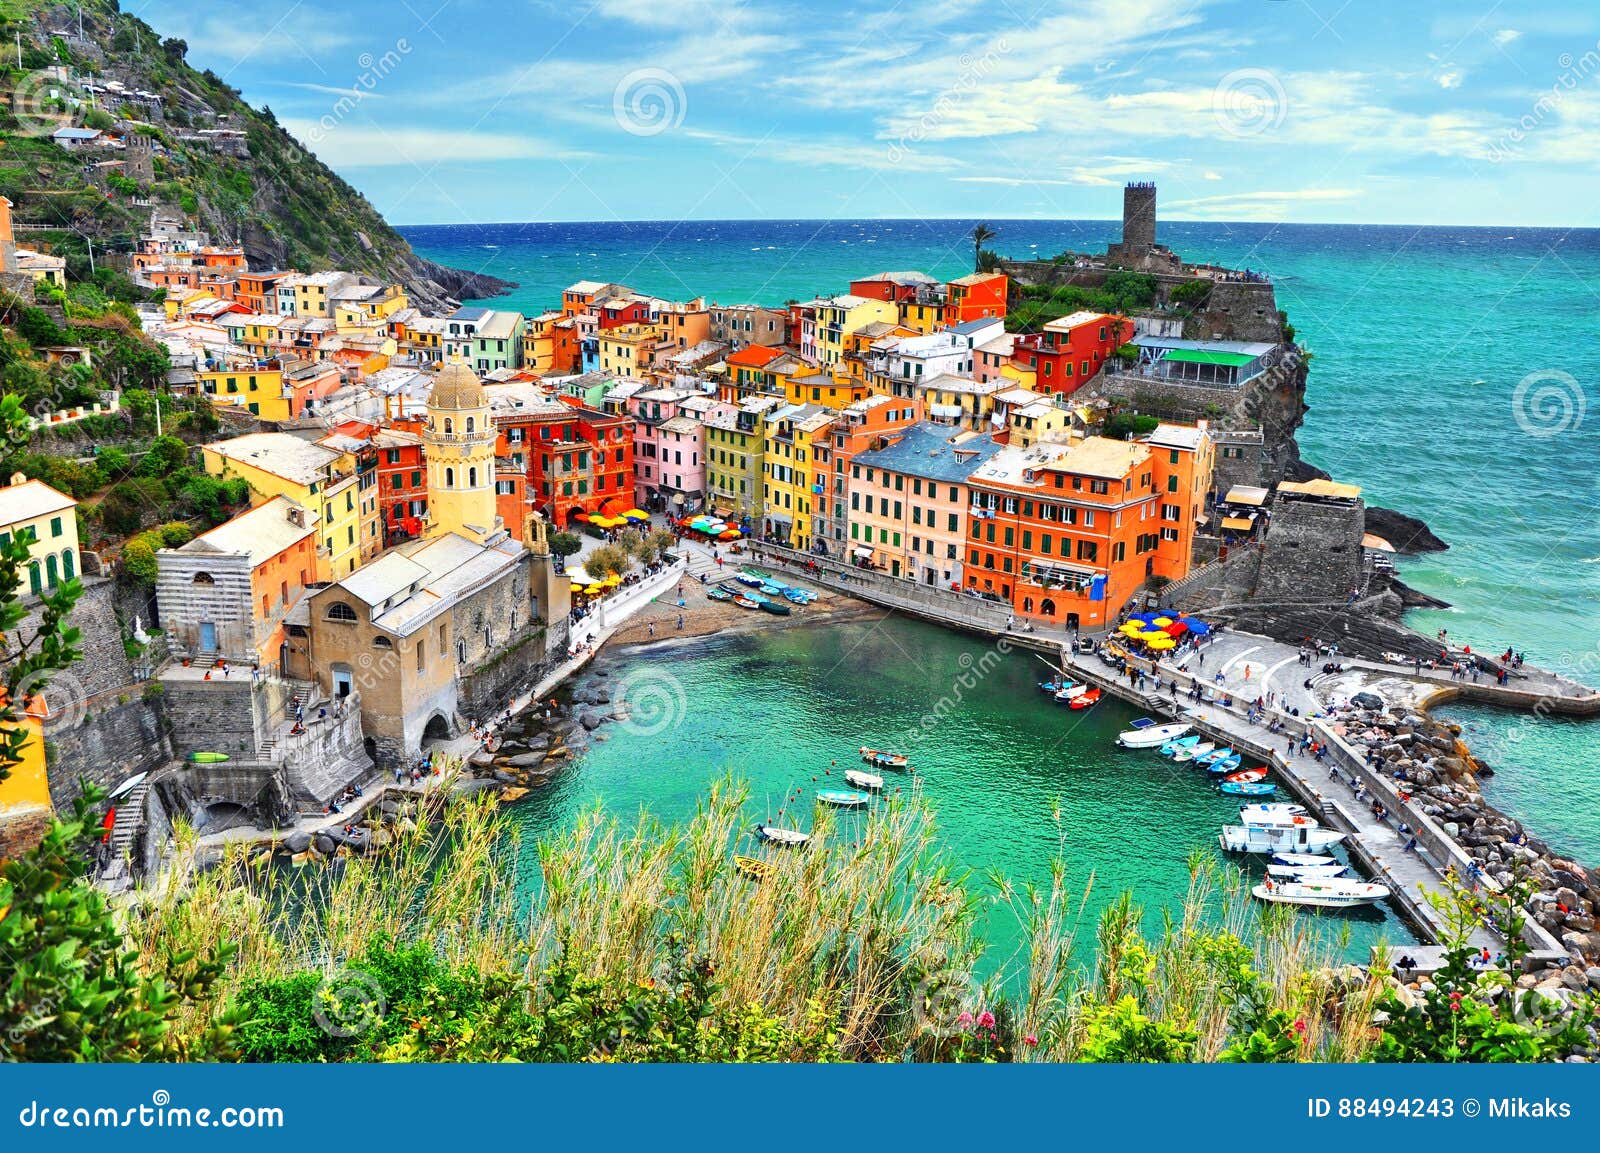 beautiful view of vernazza . is one of five famous colorful villages of cinque terre national park in italy